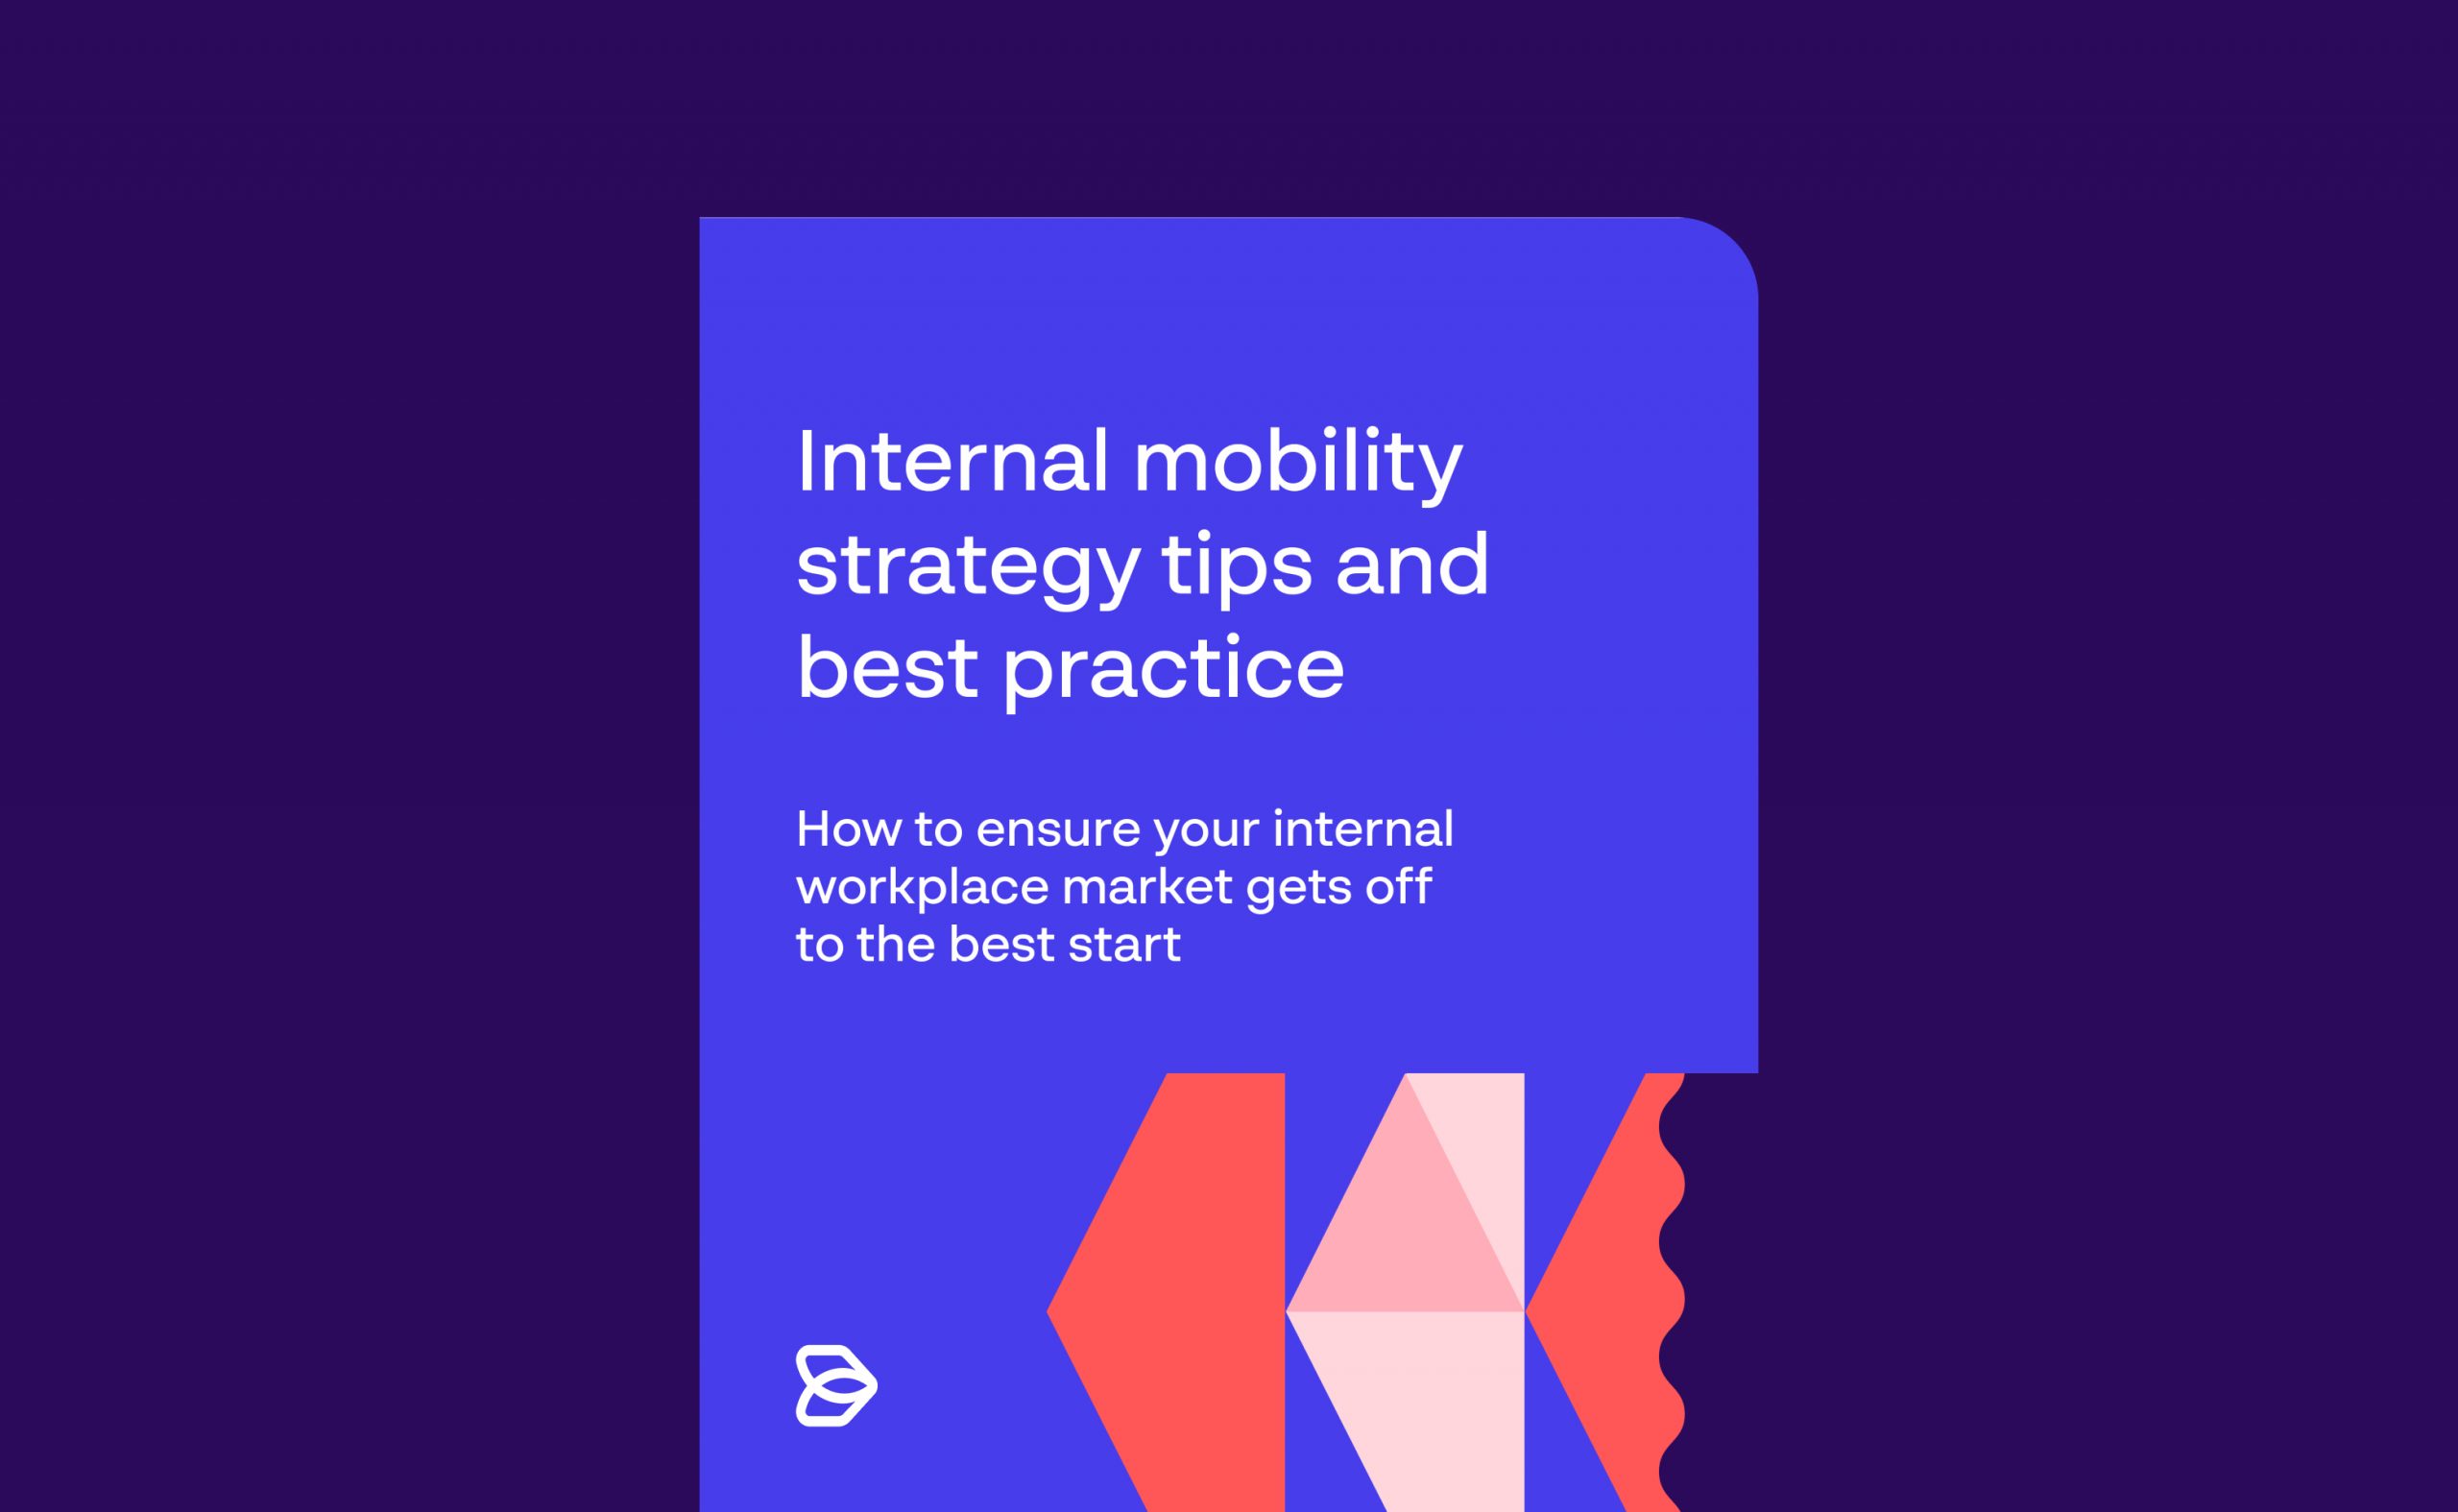 Whitepaper_Internal-mobility-strategy-tips-and-best-practice